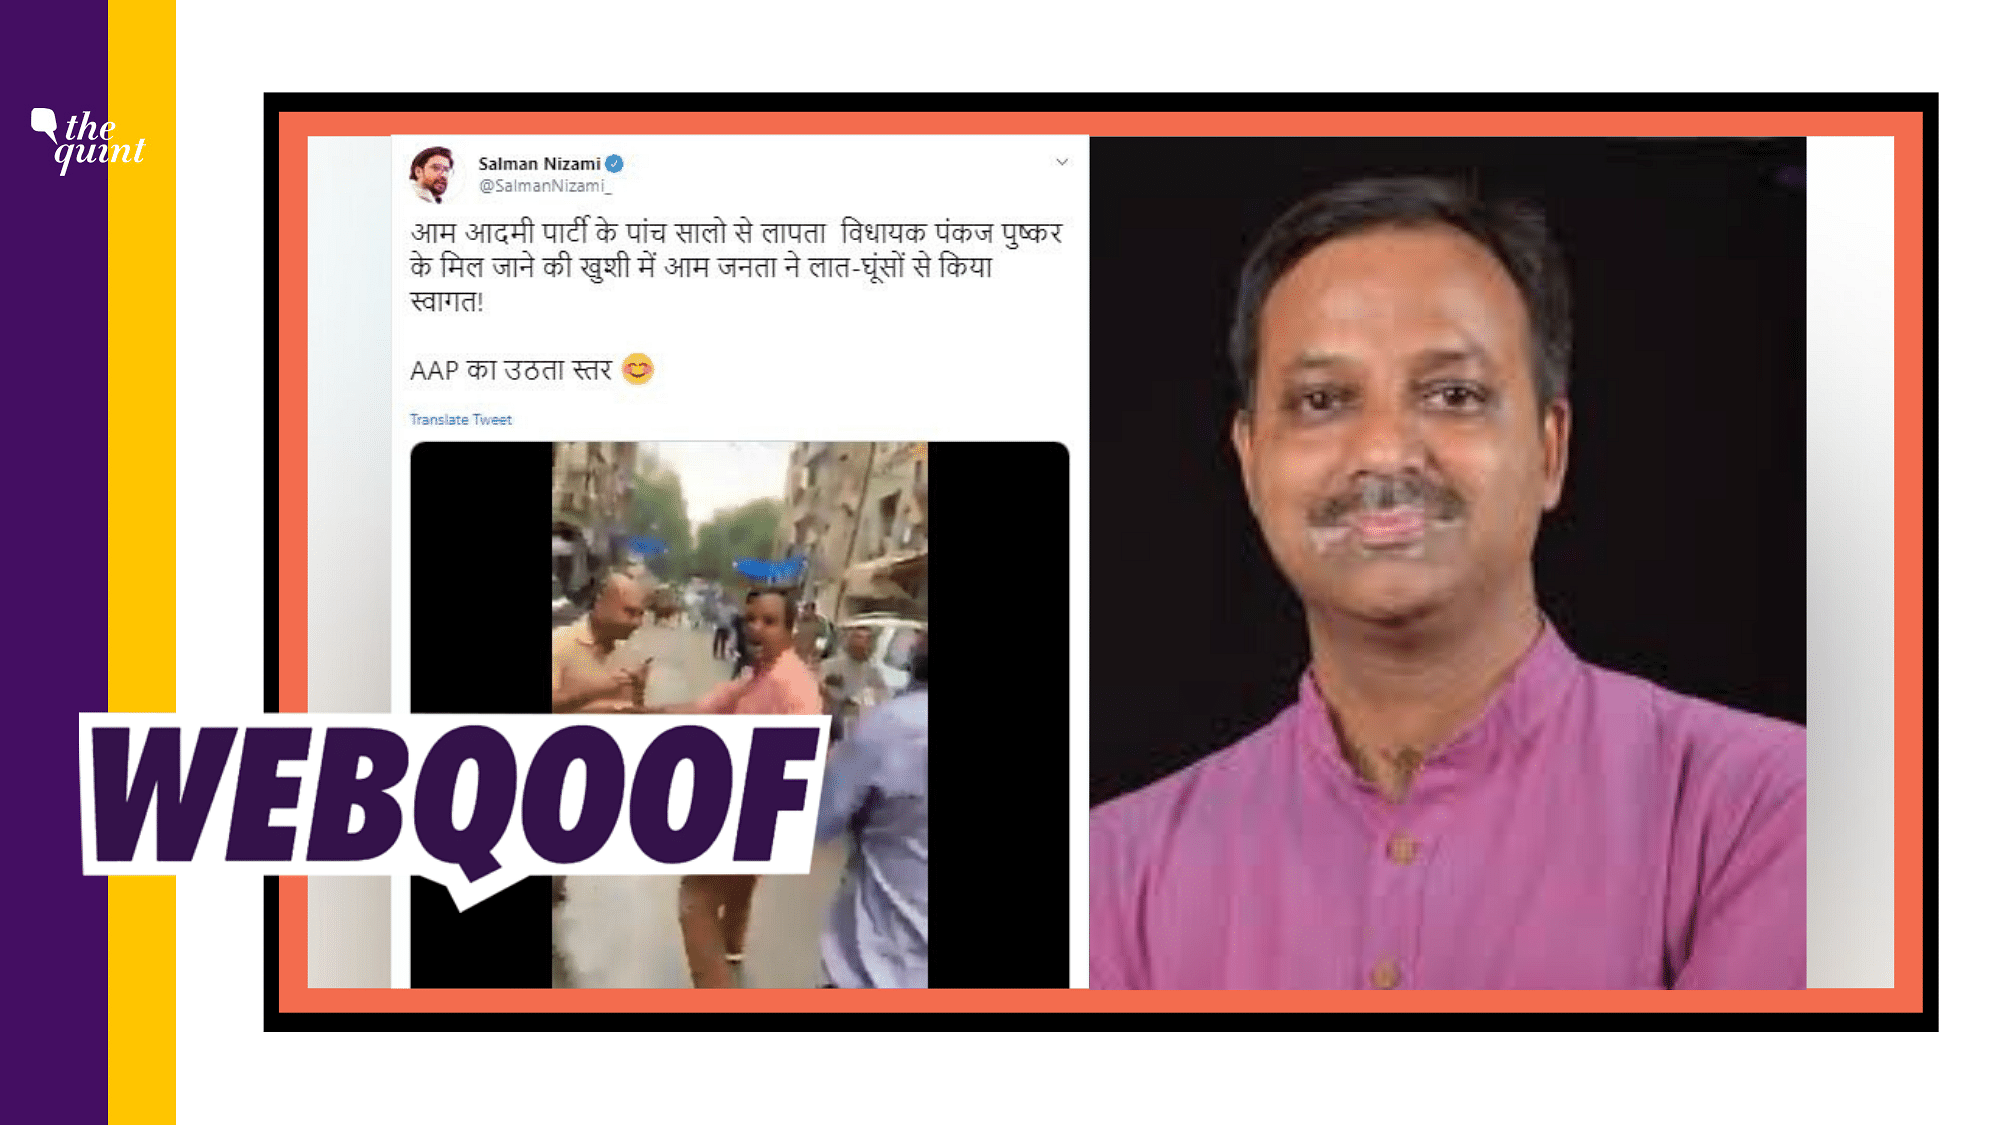 A video of a man being beaten up by a group of men on the streets is viral on social media as AAP MLA Pankaj Pushkar being beaten after he visited his constituency after being ‘missing’ for five years.